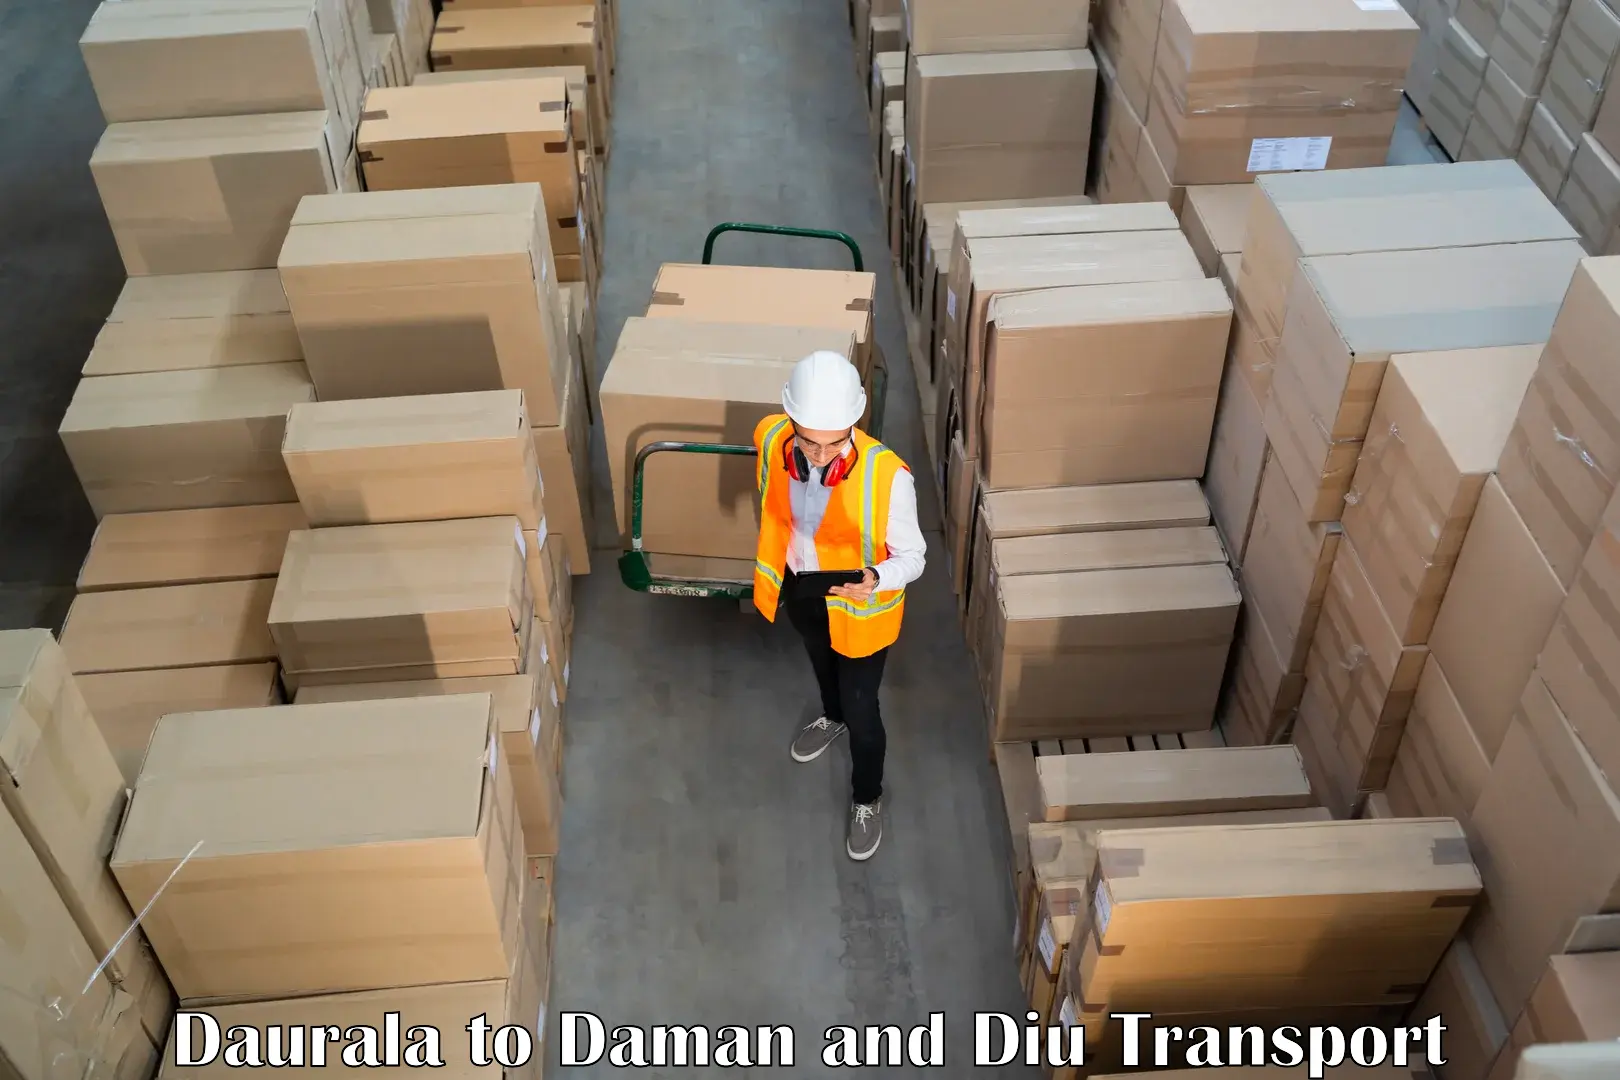 Air freight transport services in Daurala to Diu